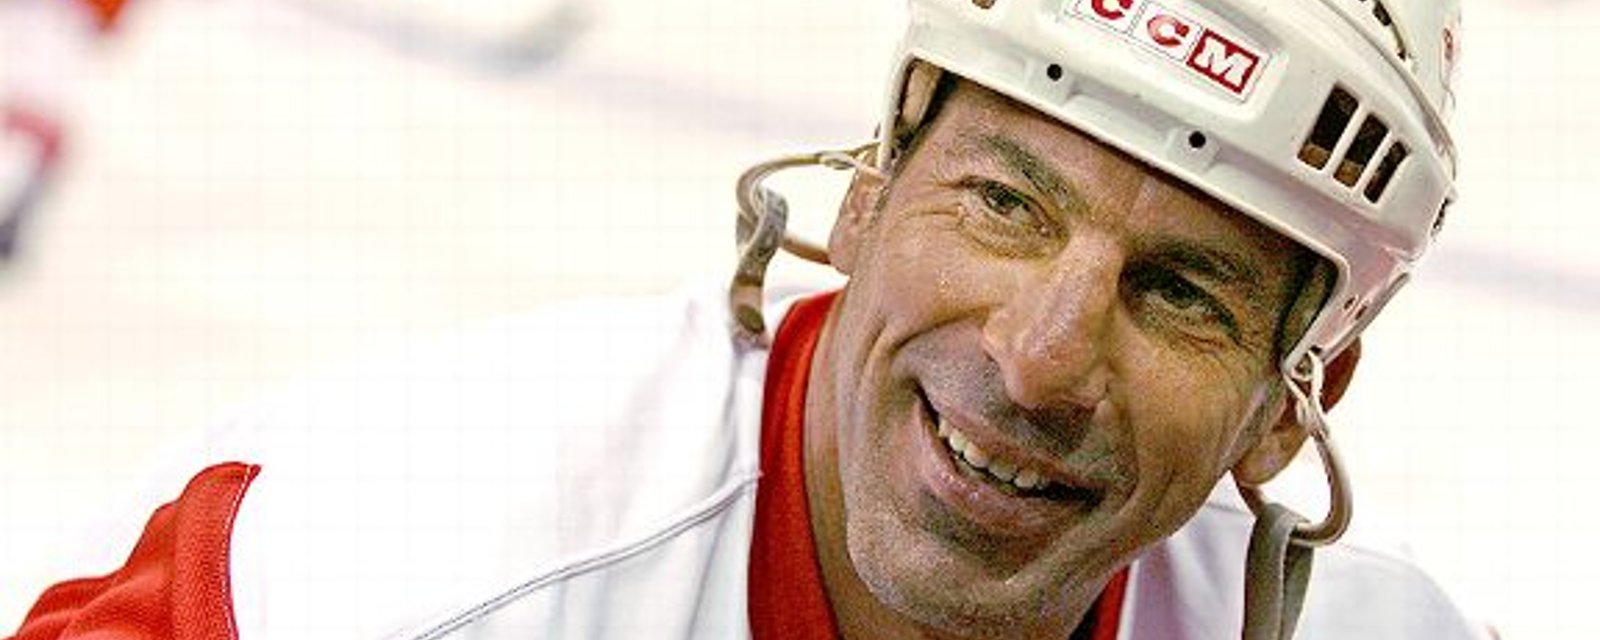 The insane story of a 48 year old Chelios’ night of partying before game day